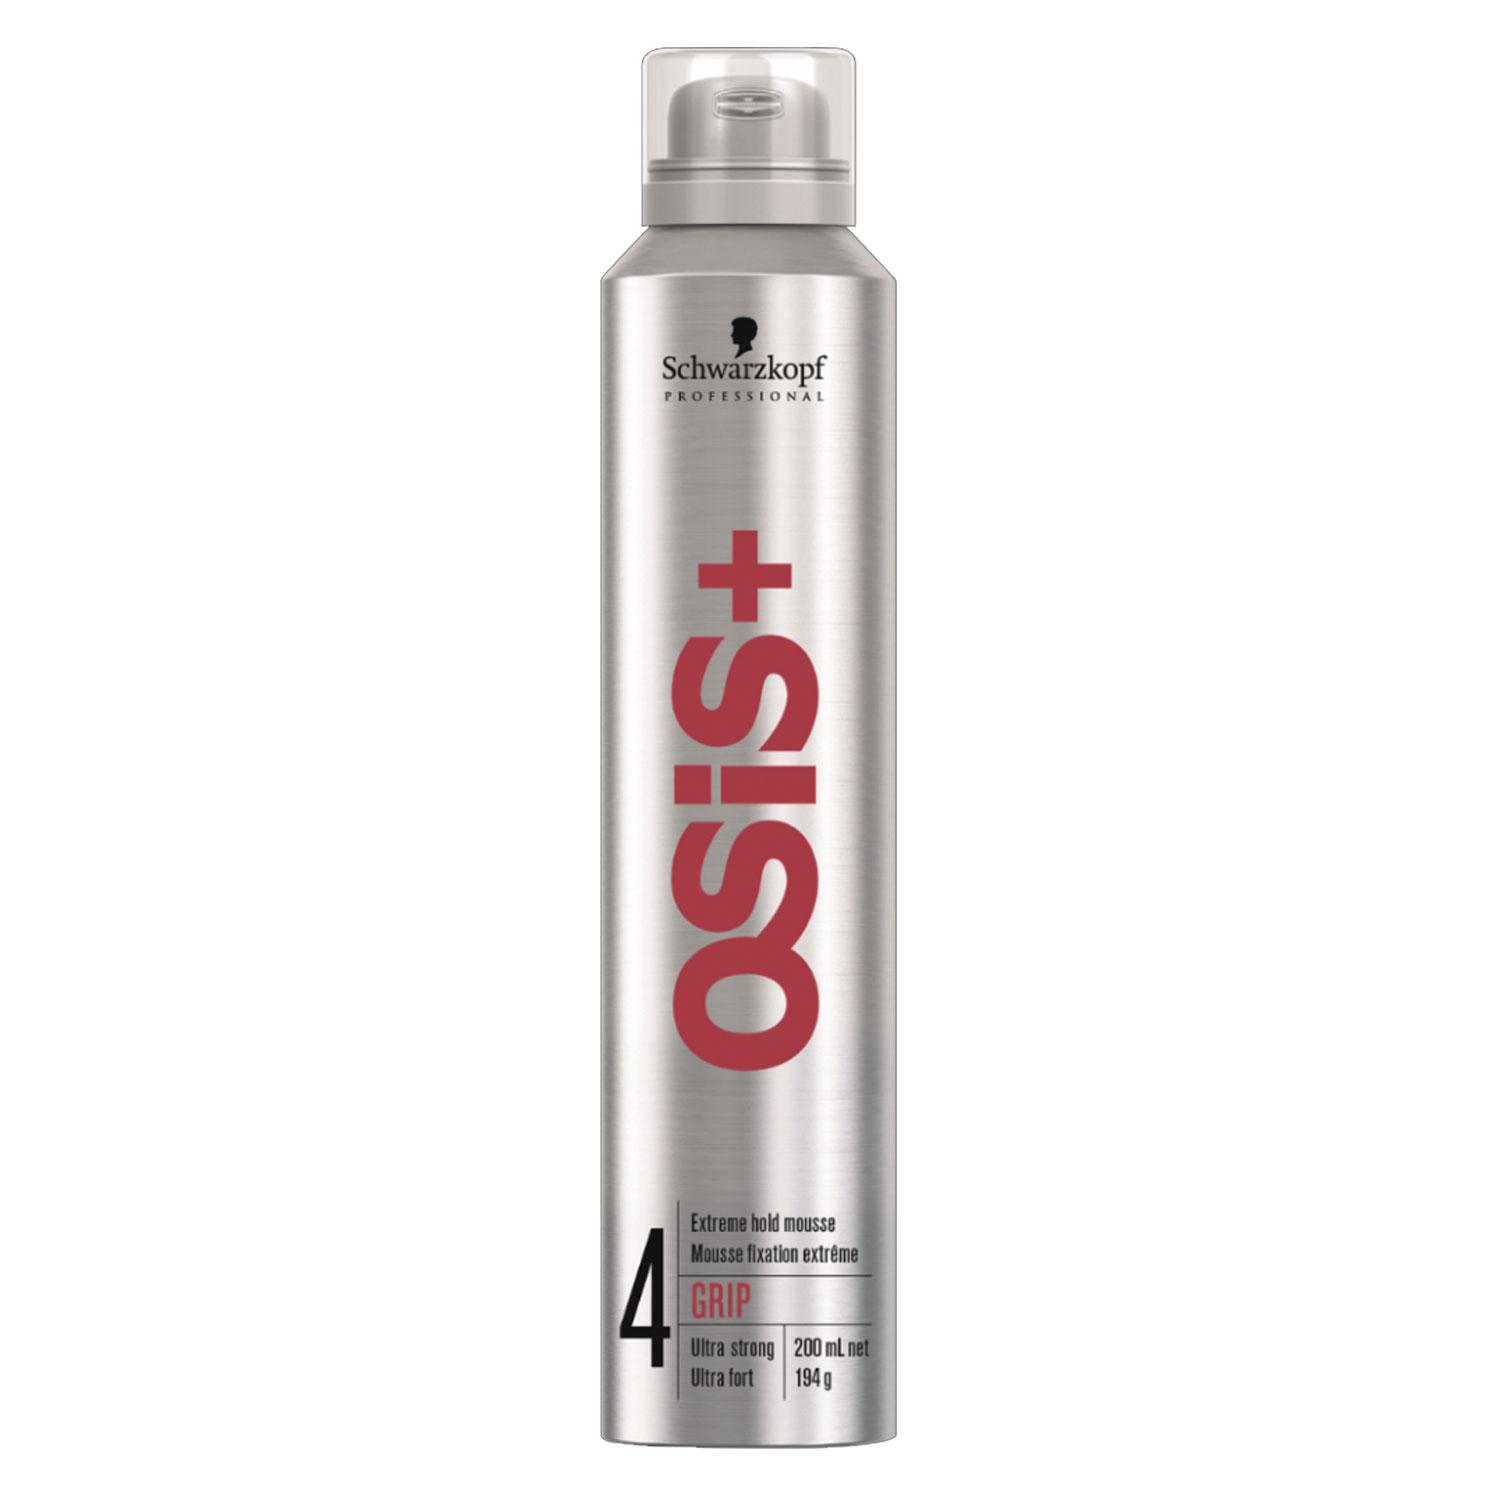 Osis - Grip Extreme Hold Mousse